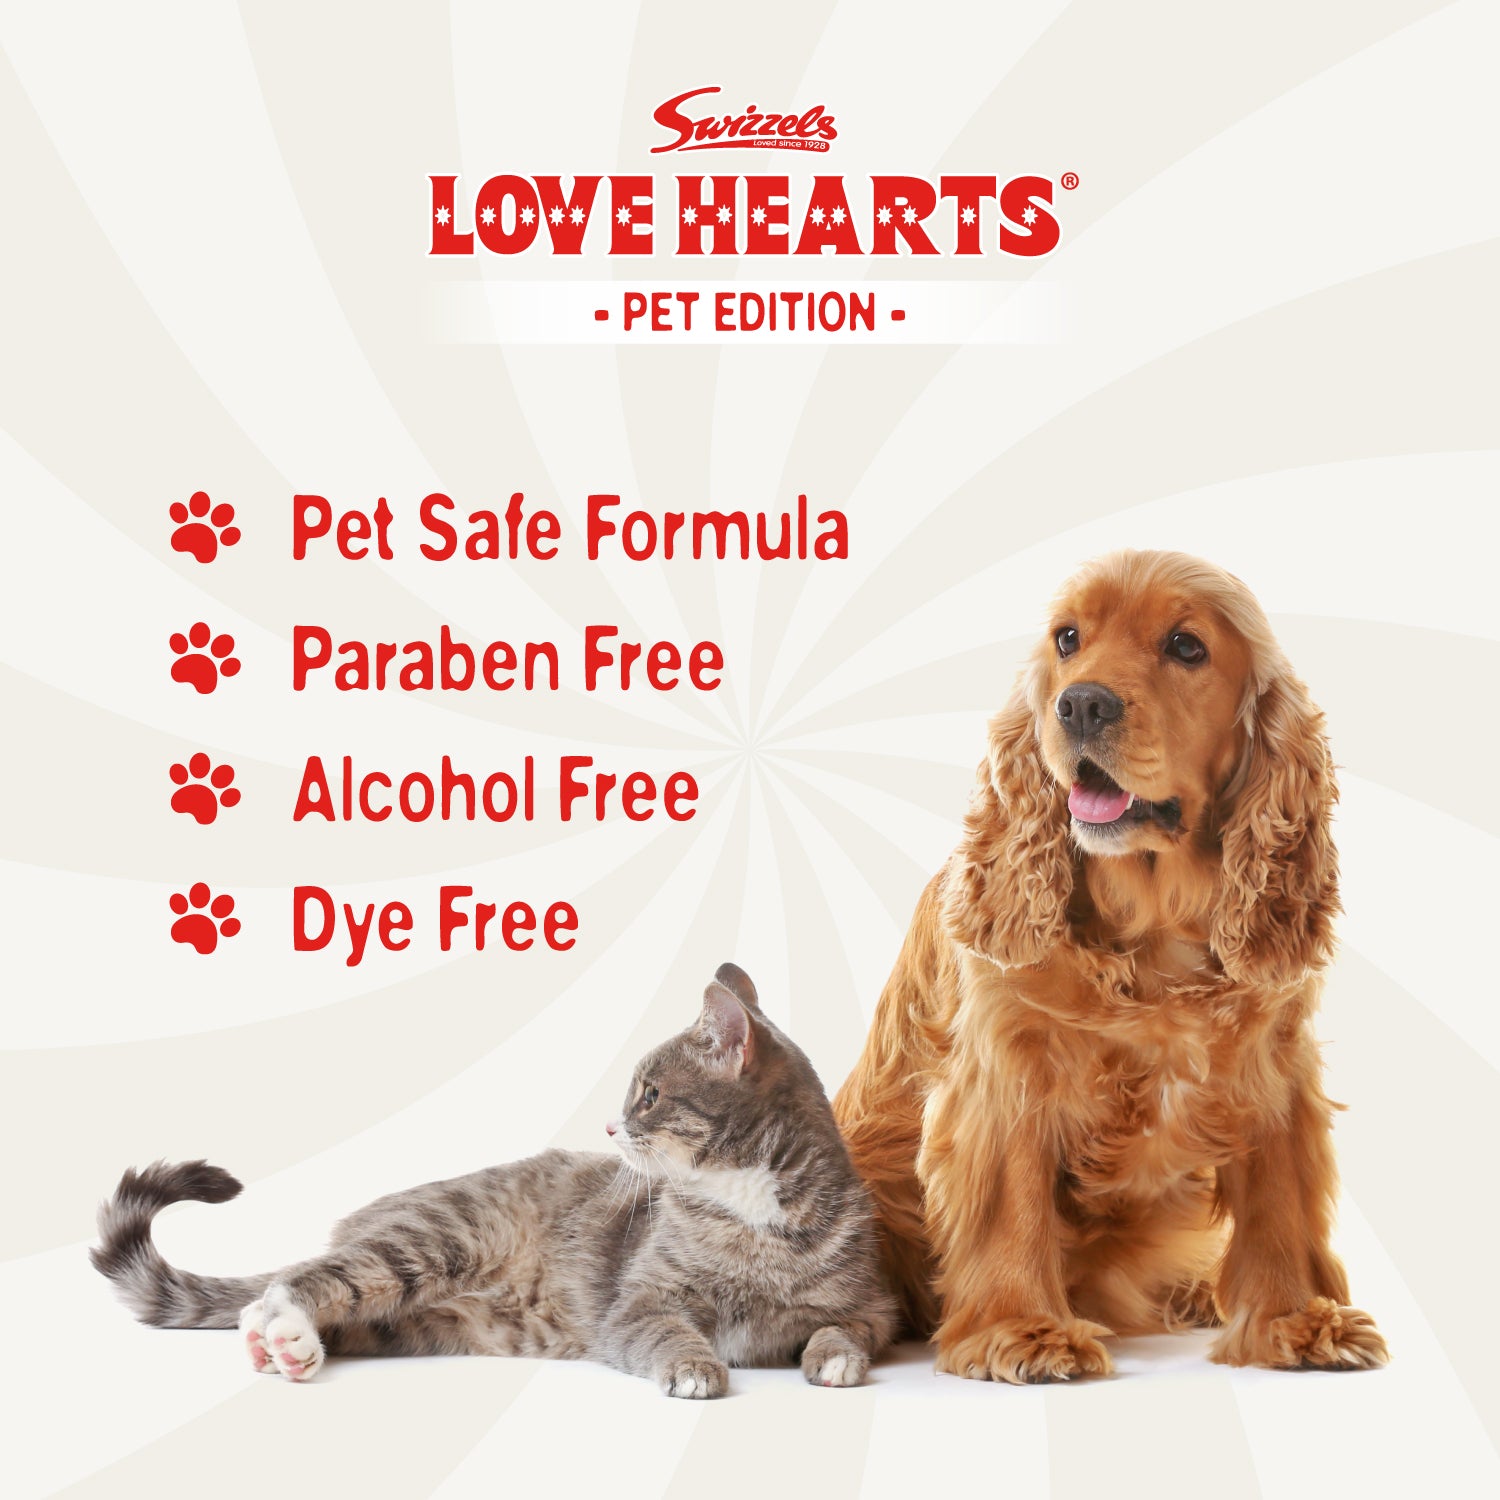 Swizzels Love Hearts - Cage & Litter Tray Cleaner - 750ml